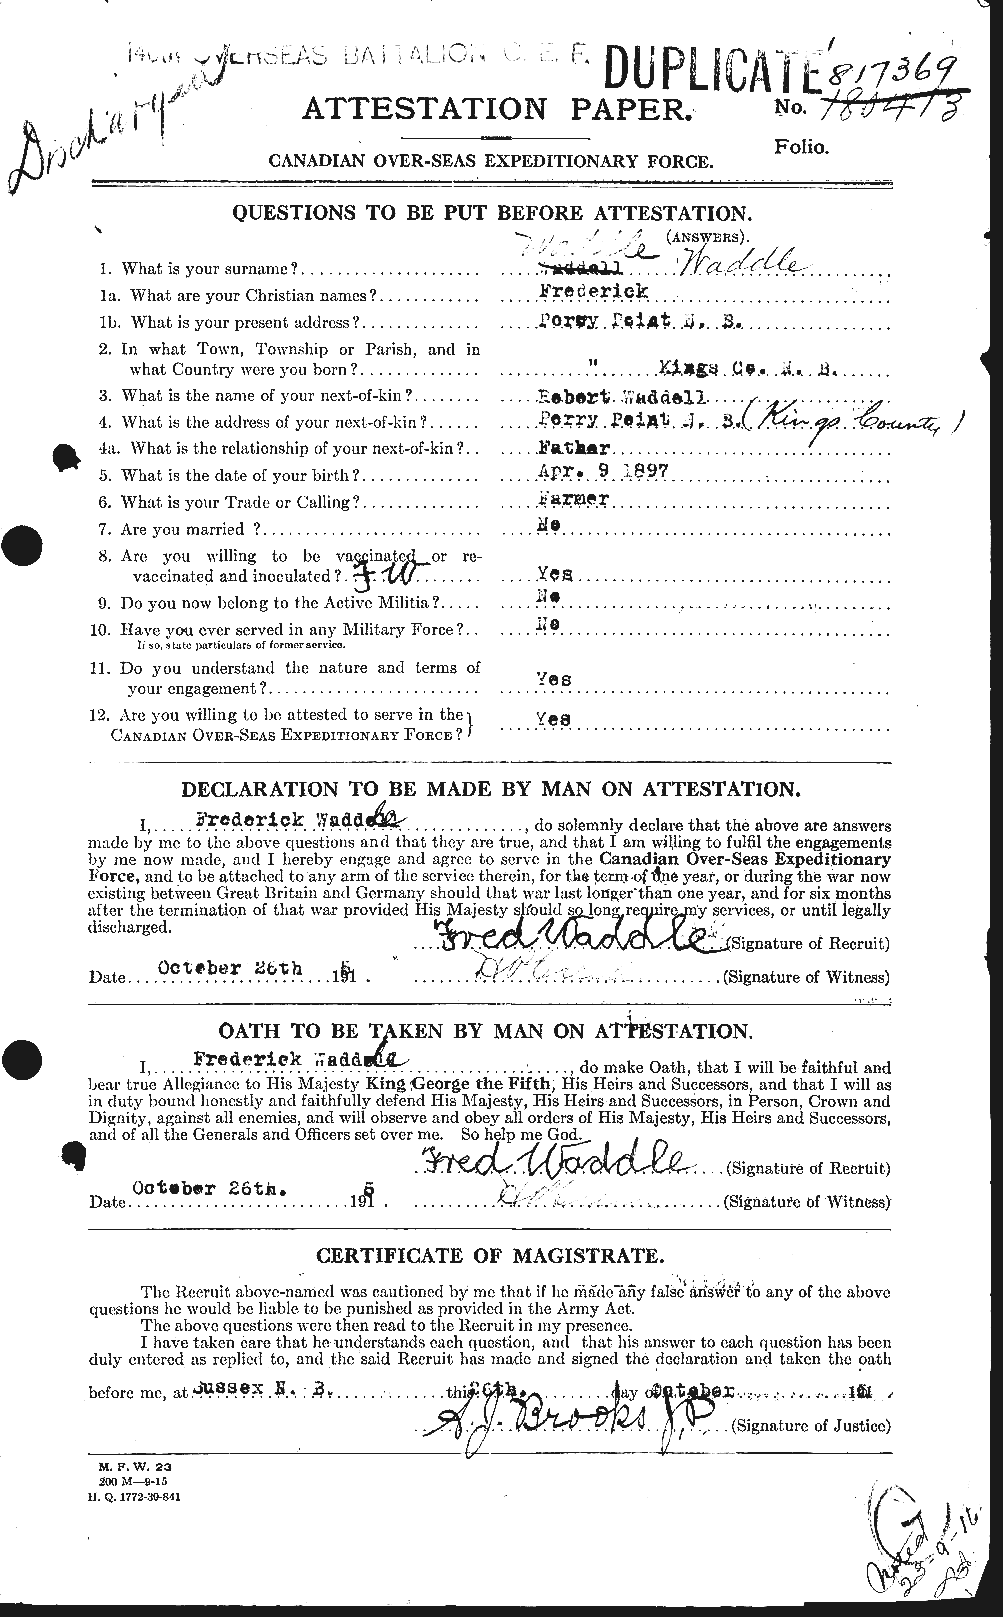 Personnel Records of the First World War - CEF 649974a